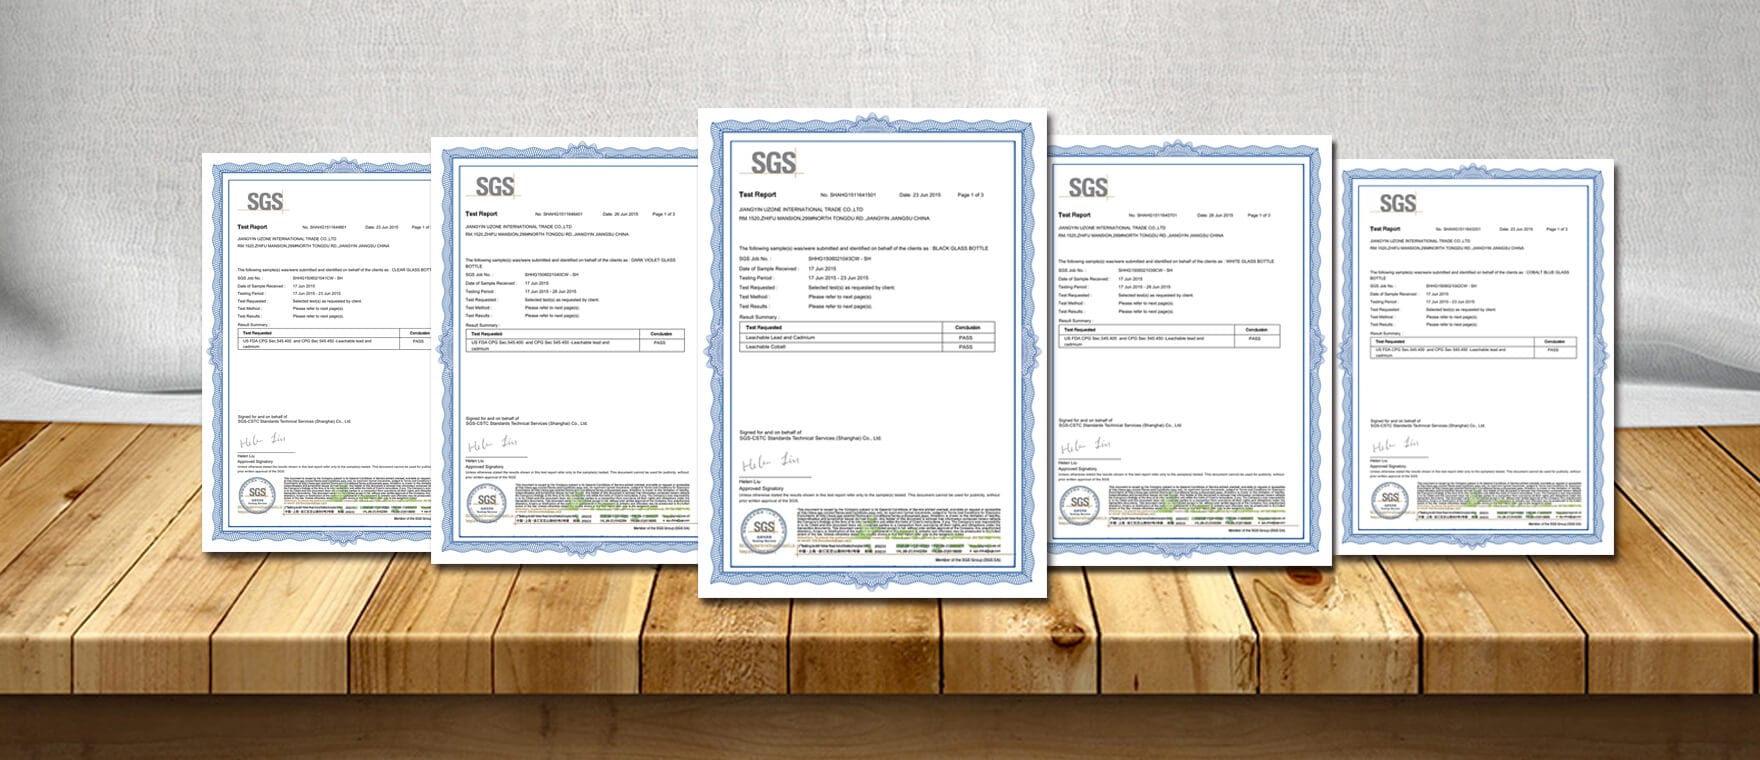 SGS Certifications of UzoneGroup Cosmetic packaging glass bottle products